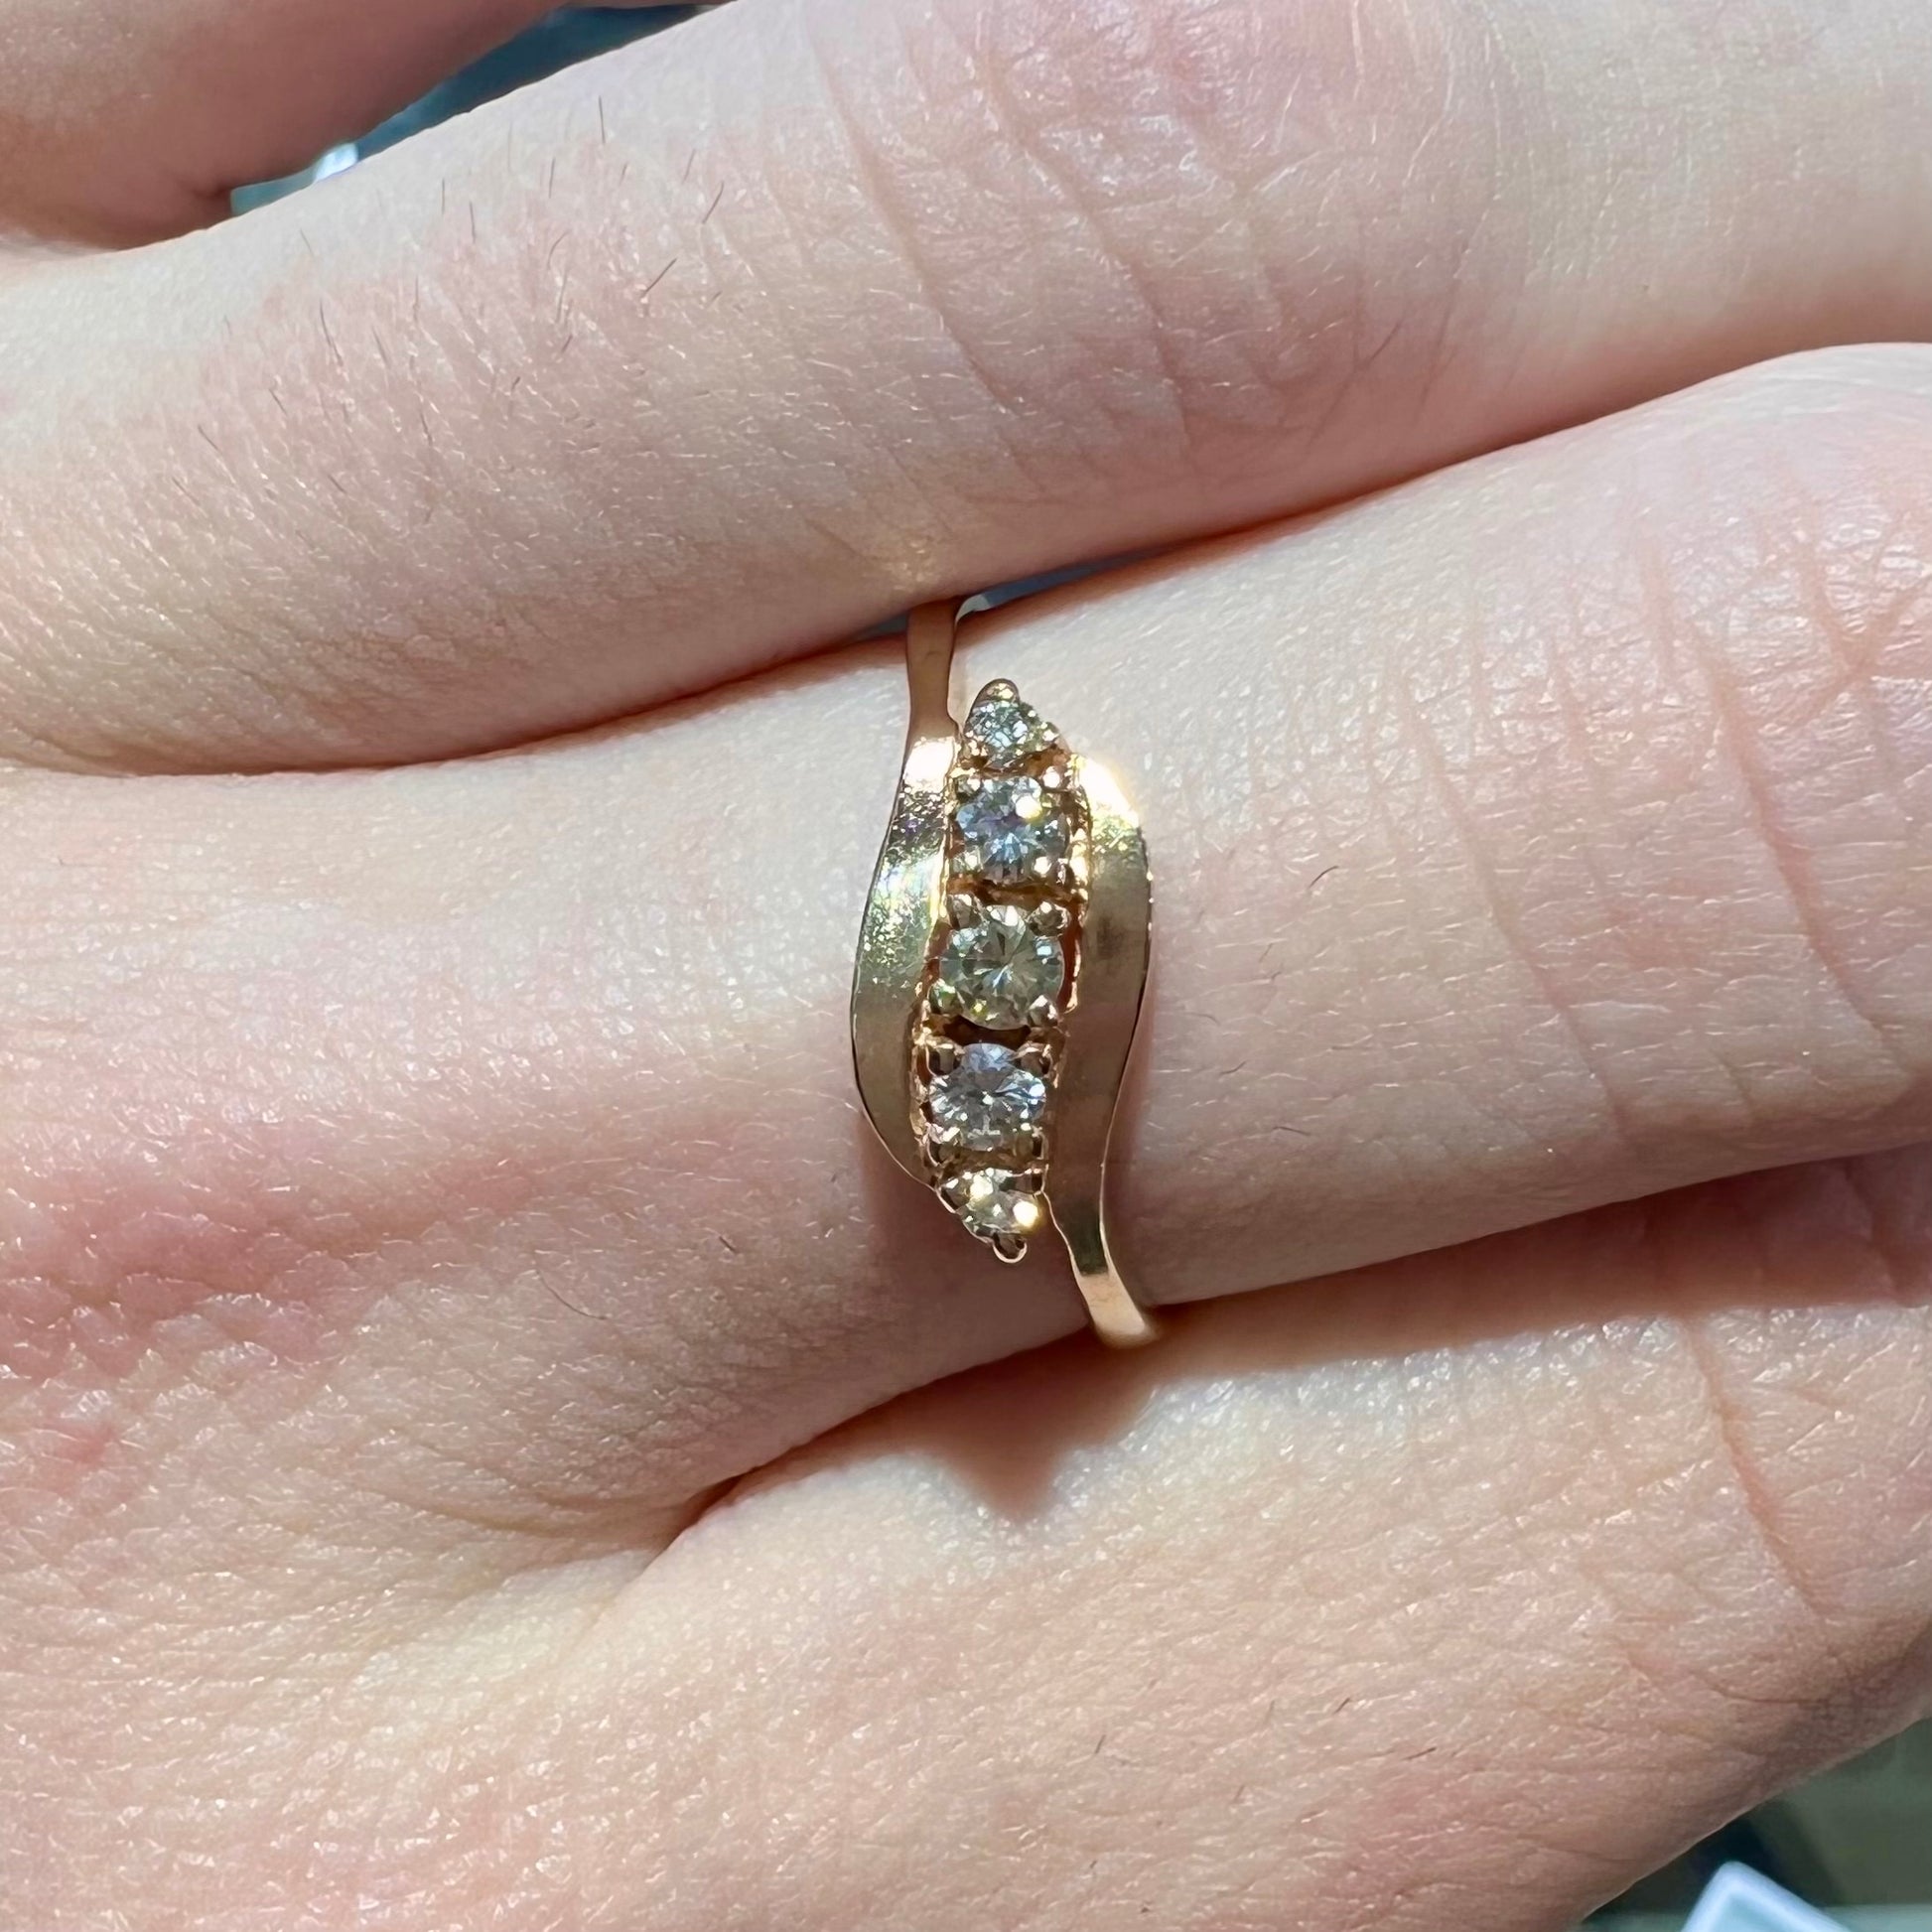 A yellow gold ladies' promise ring set with five Standard Round Brilliant Cut diamonds.